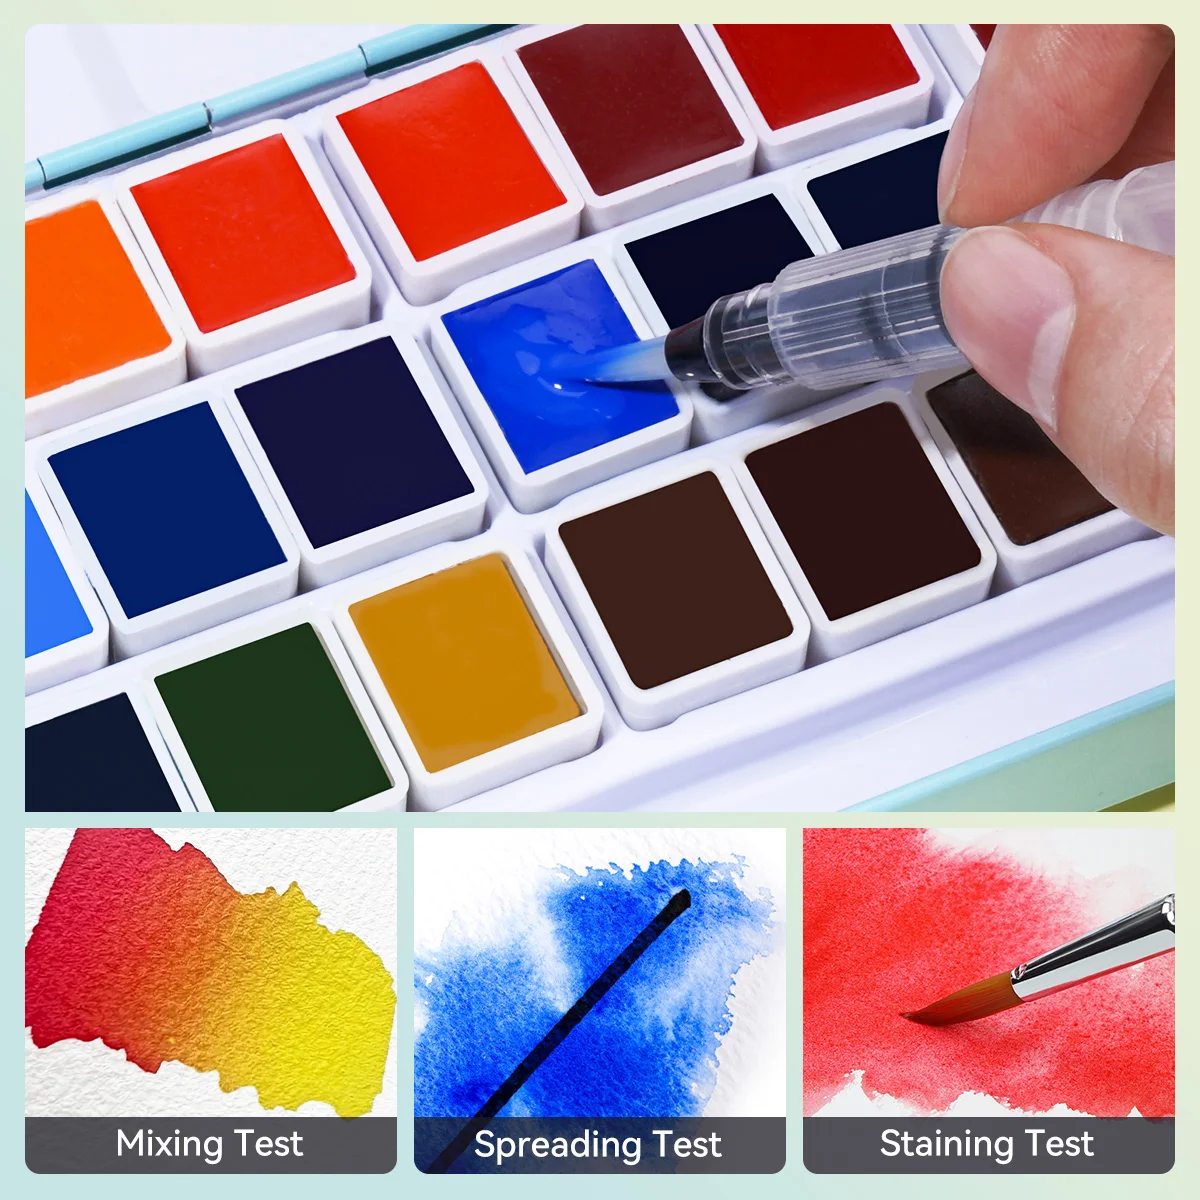 Watercolor Paint, 48 Colors Pan with 13 FREE paint brushes - Set